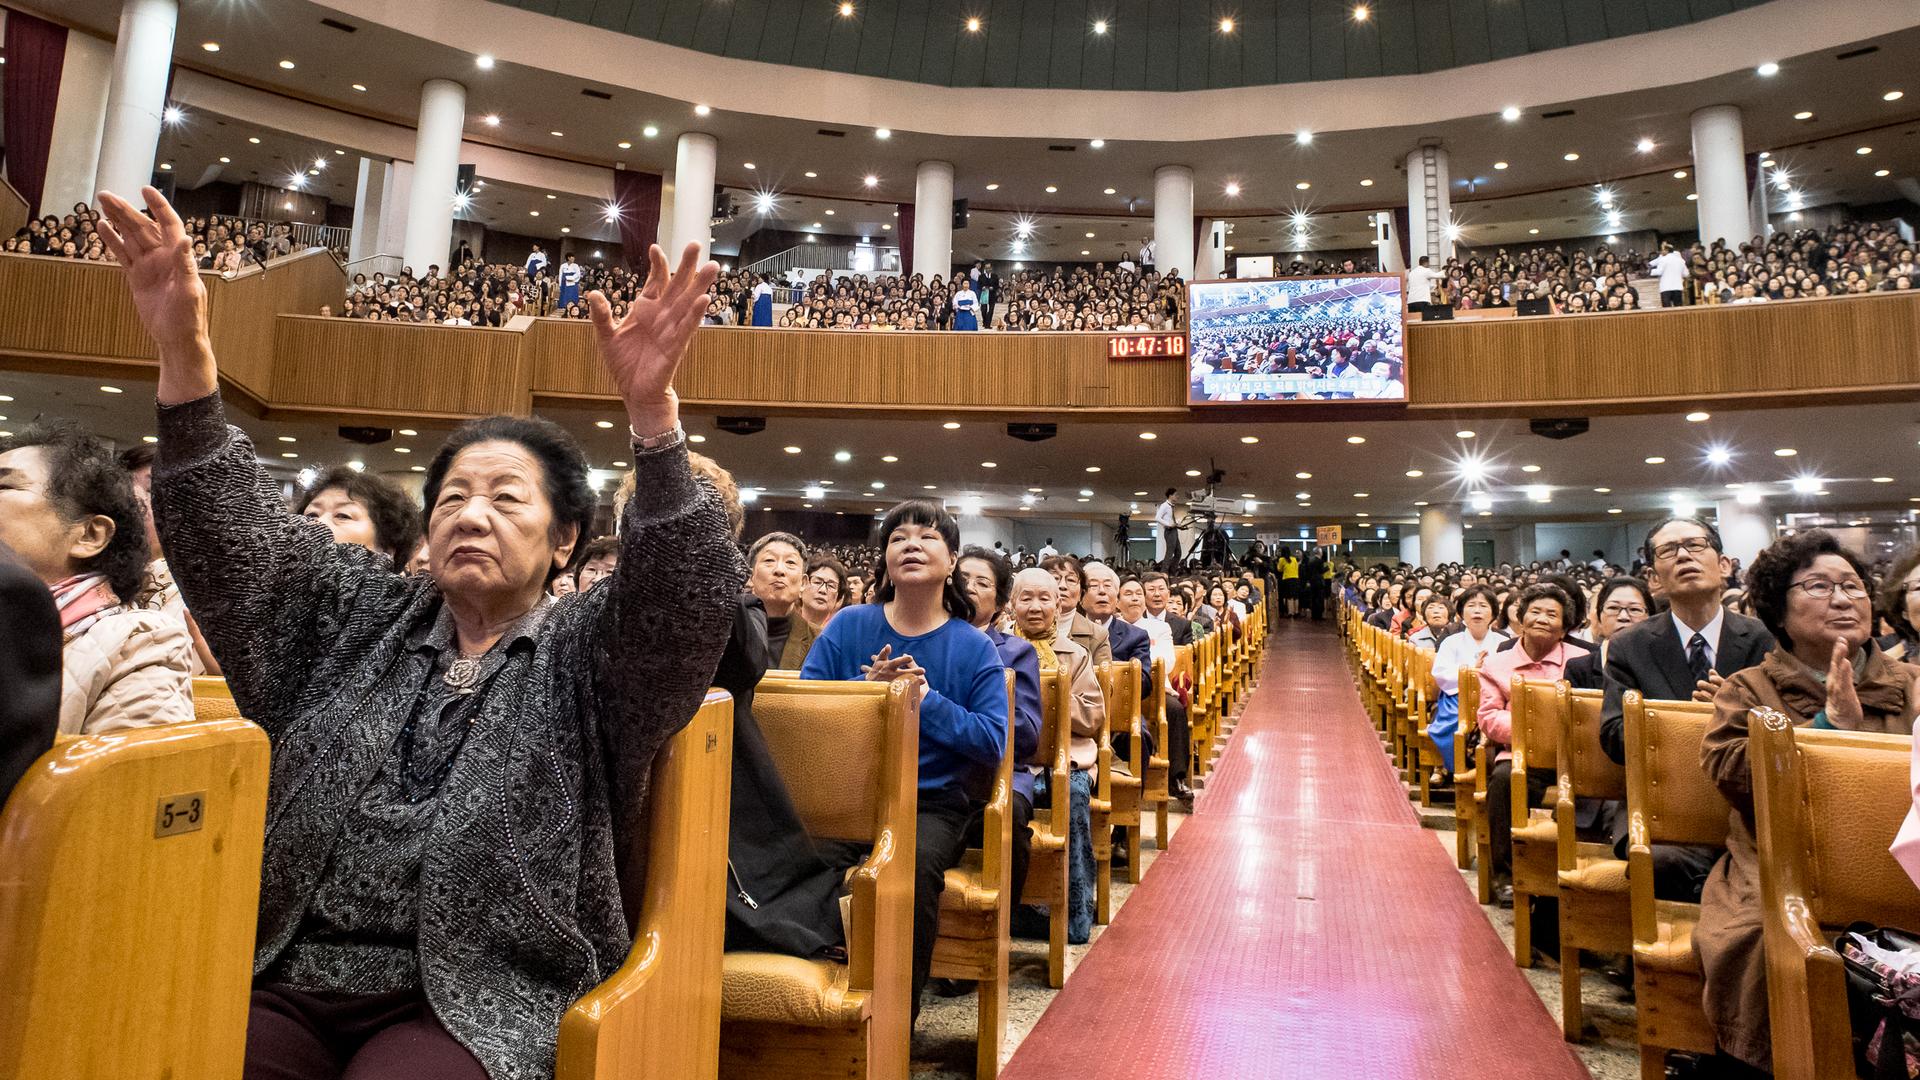 Yoido Full Gospel Church began in 1958 and grew by serving poor and working class South Koreans who moved to the capital city of Seoul. Today, it's largest megachurch in the world.     